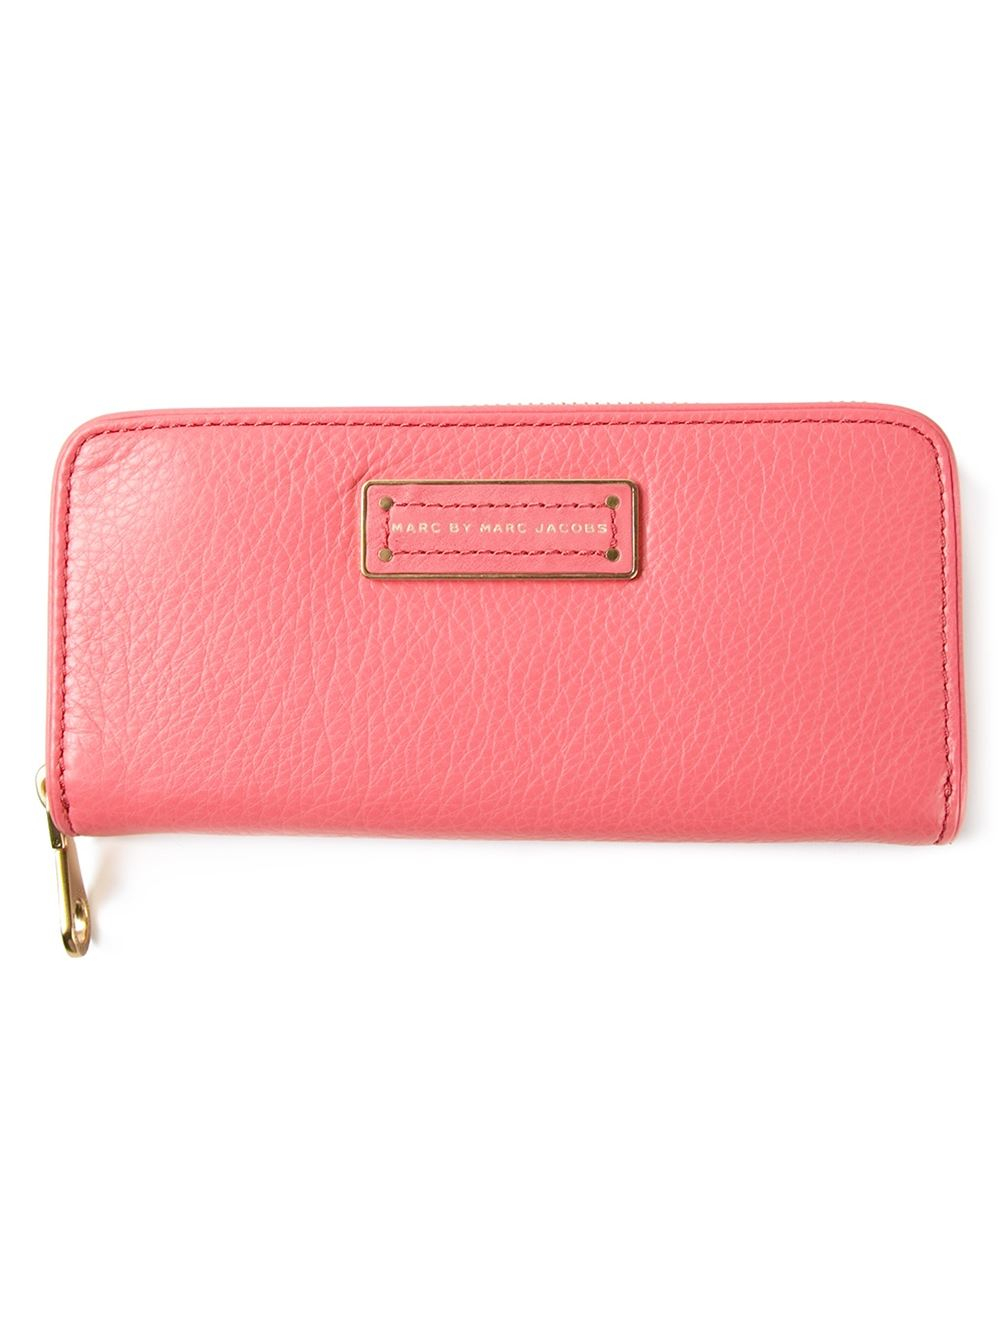 Marc By Marc Jacobs 'Too Hot To Handle Large Zip Around' Wallet in Pink